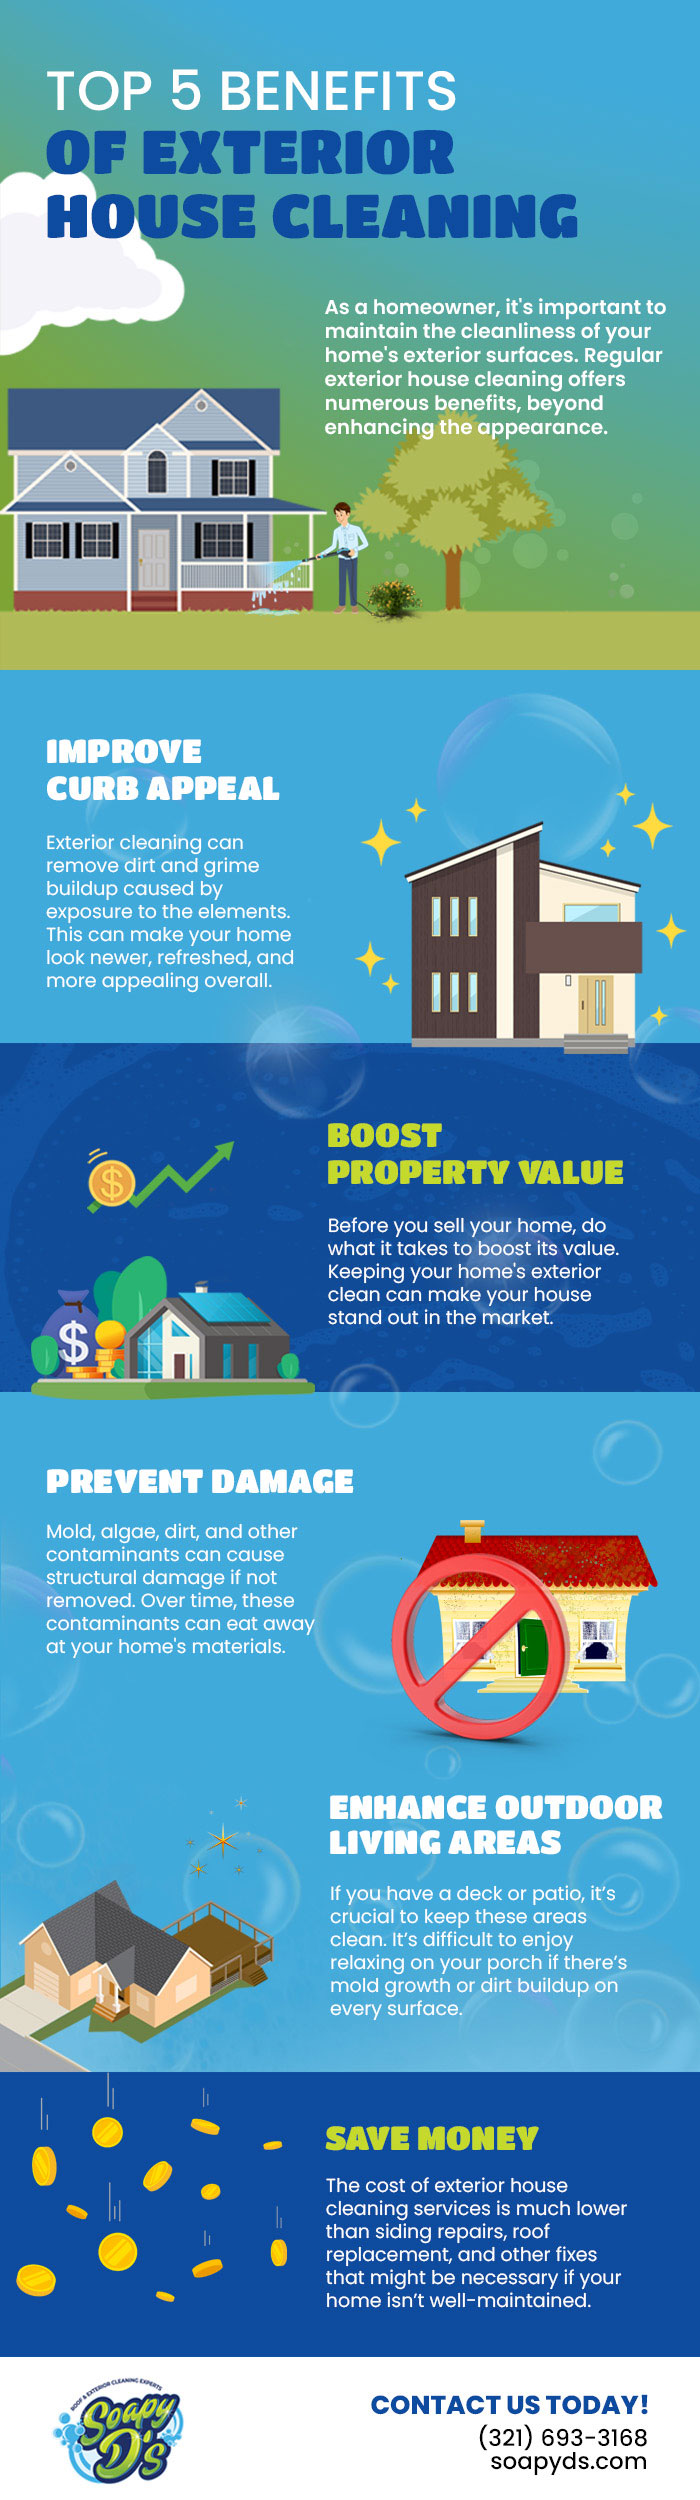 Cleaning the exterior of your home has multiple benefits.